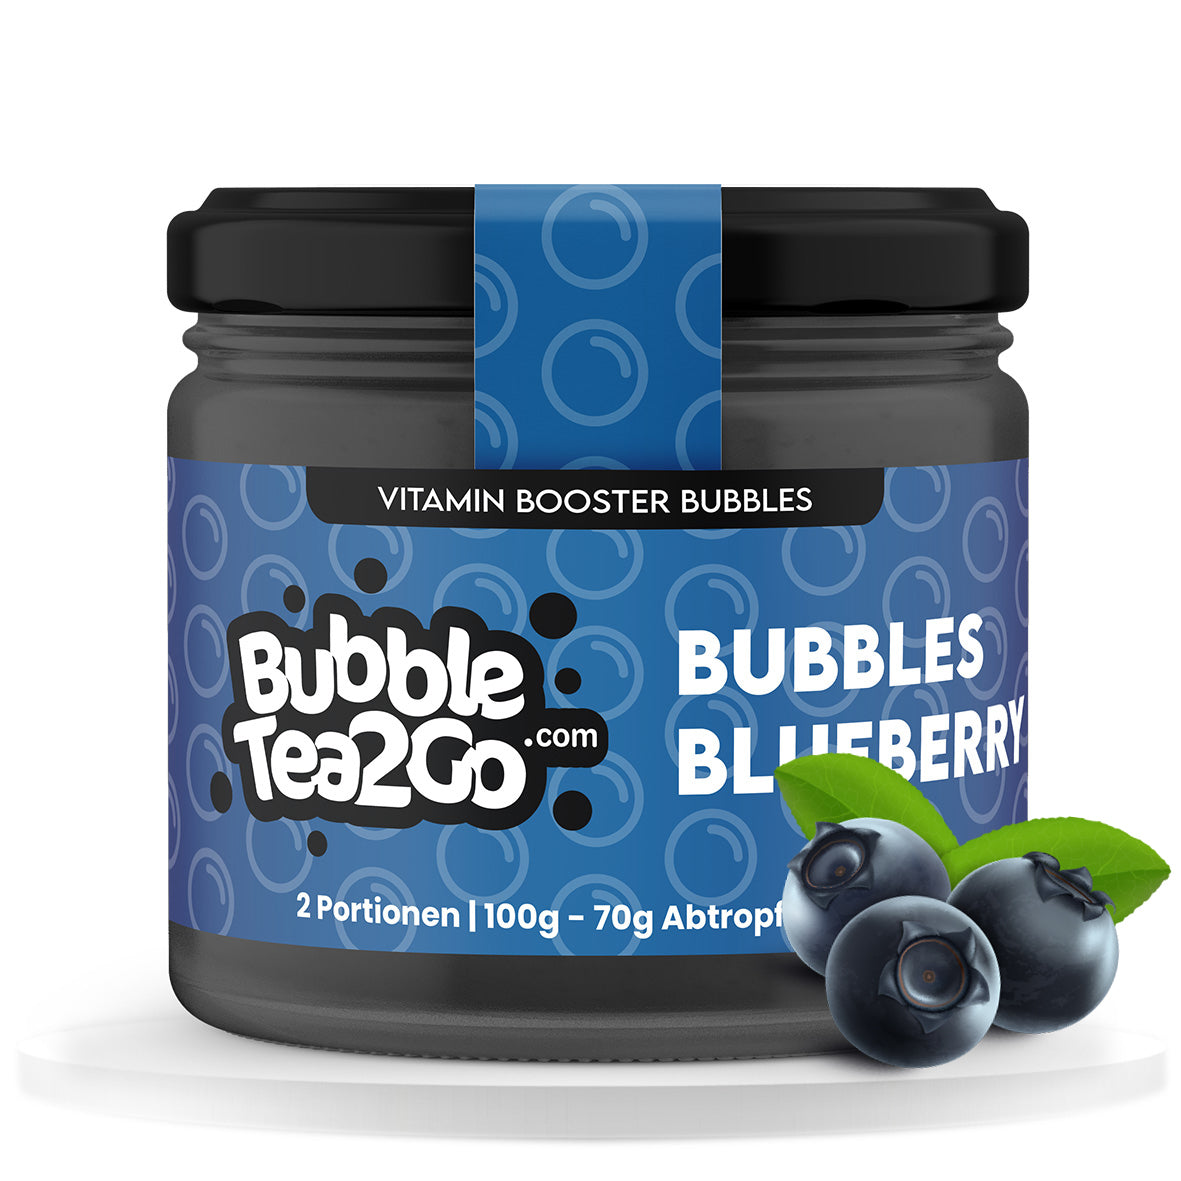 Bubbles - Blueberry 2 portions (120g)